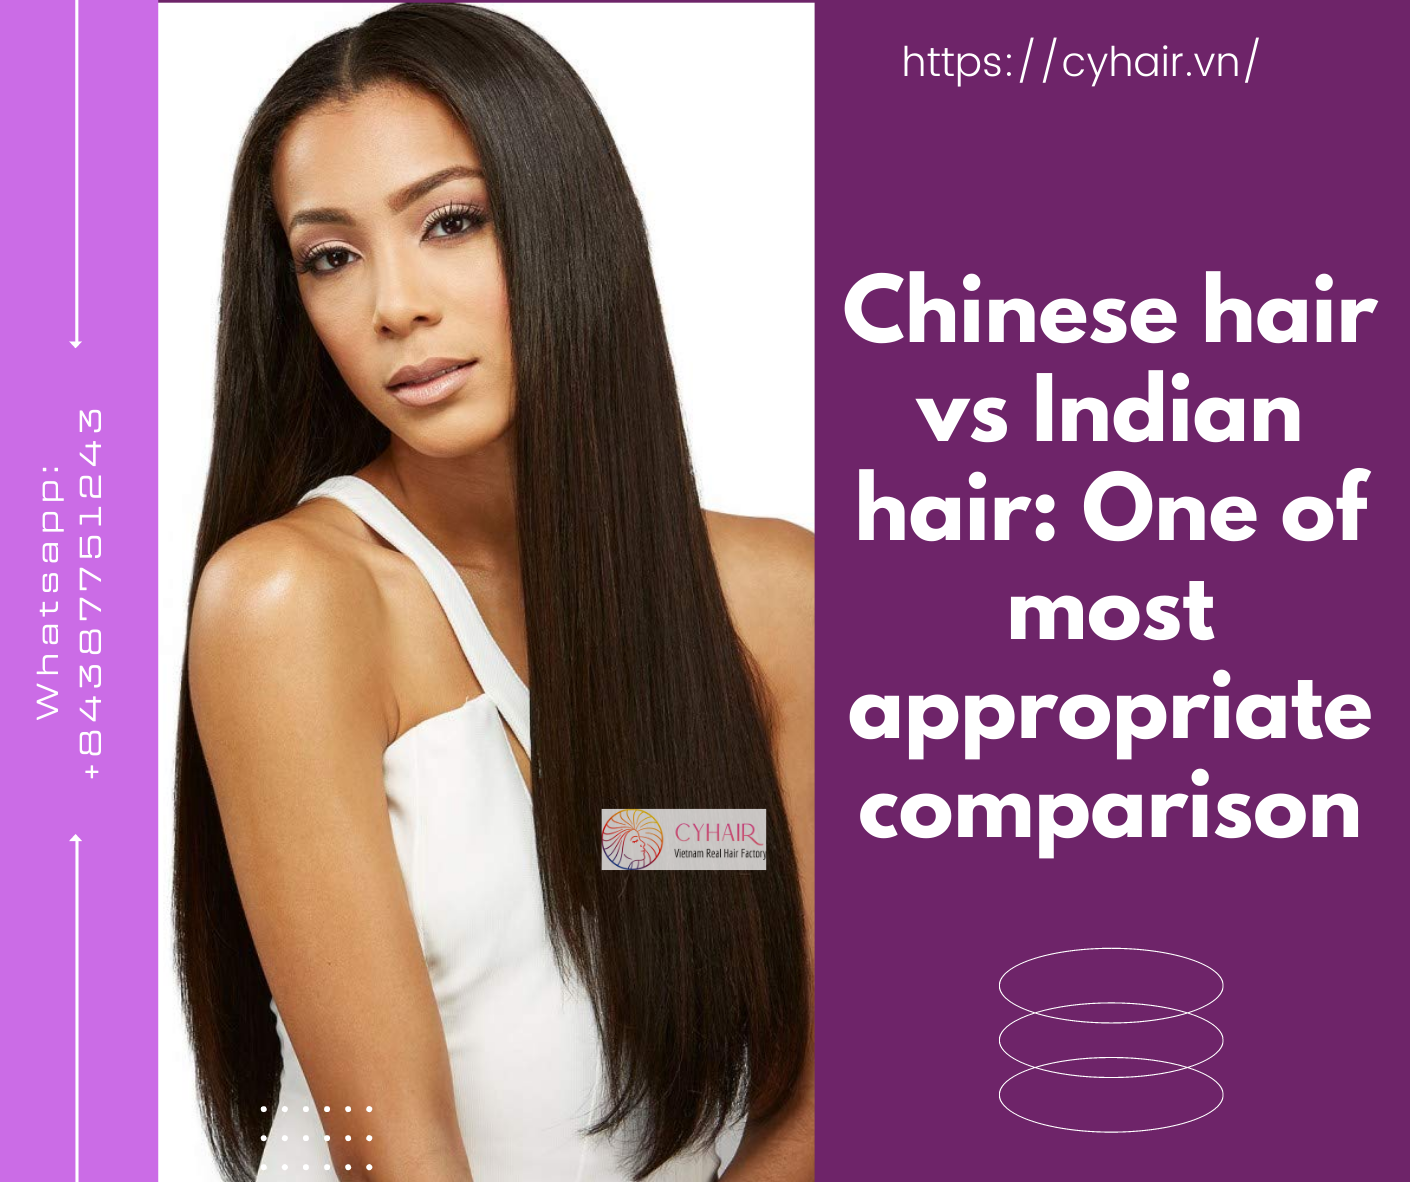 Chinese hair vs Indian hair: One of most appropriate comparison